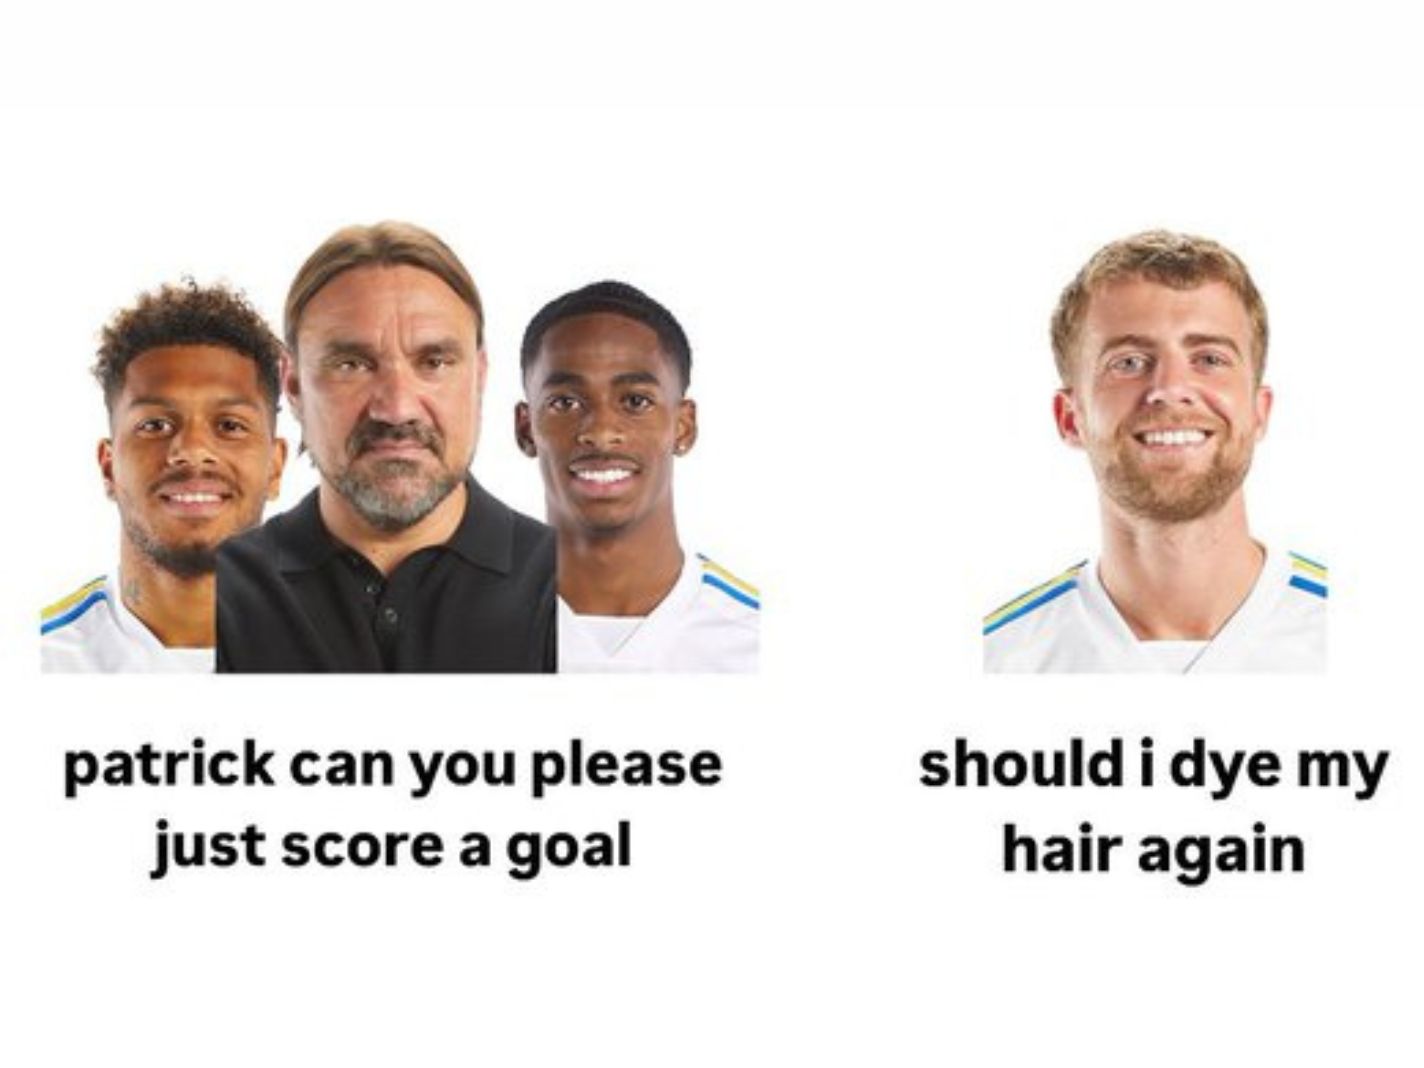 There’s A New Genre Of Football Memes Taking Over Twitter: Paqueta, Mudryk, Hojlund, More